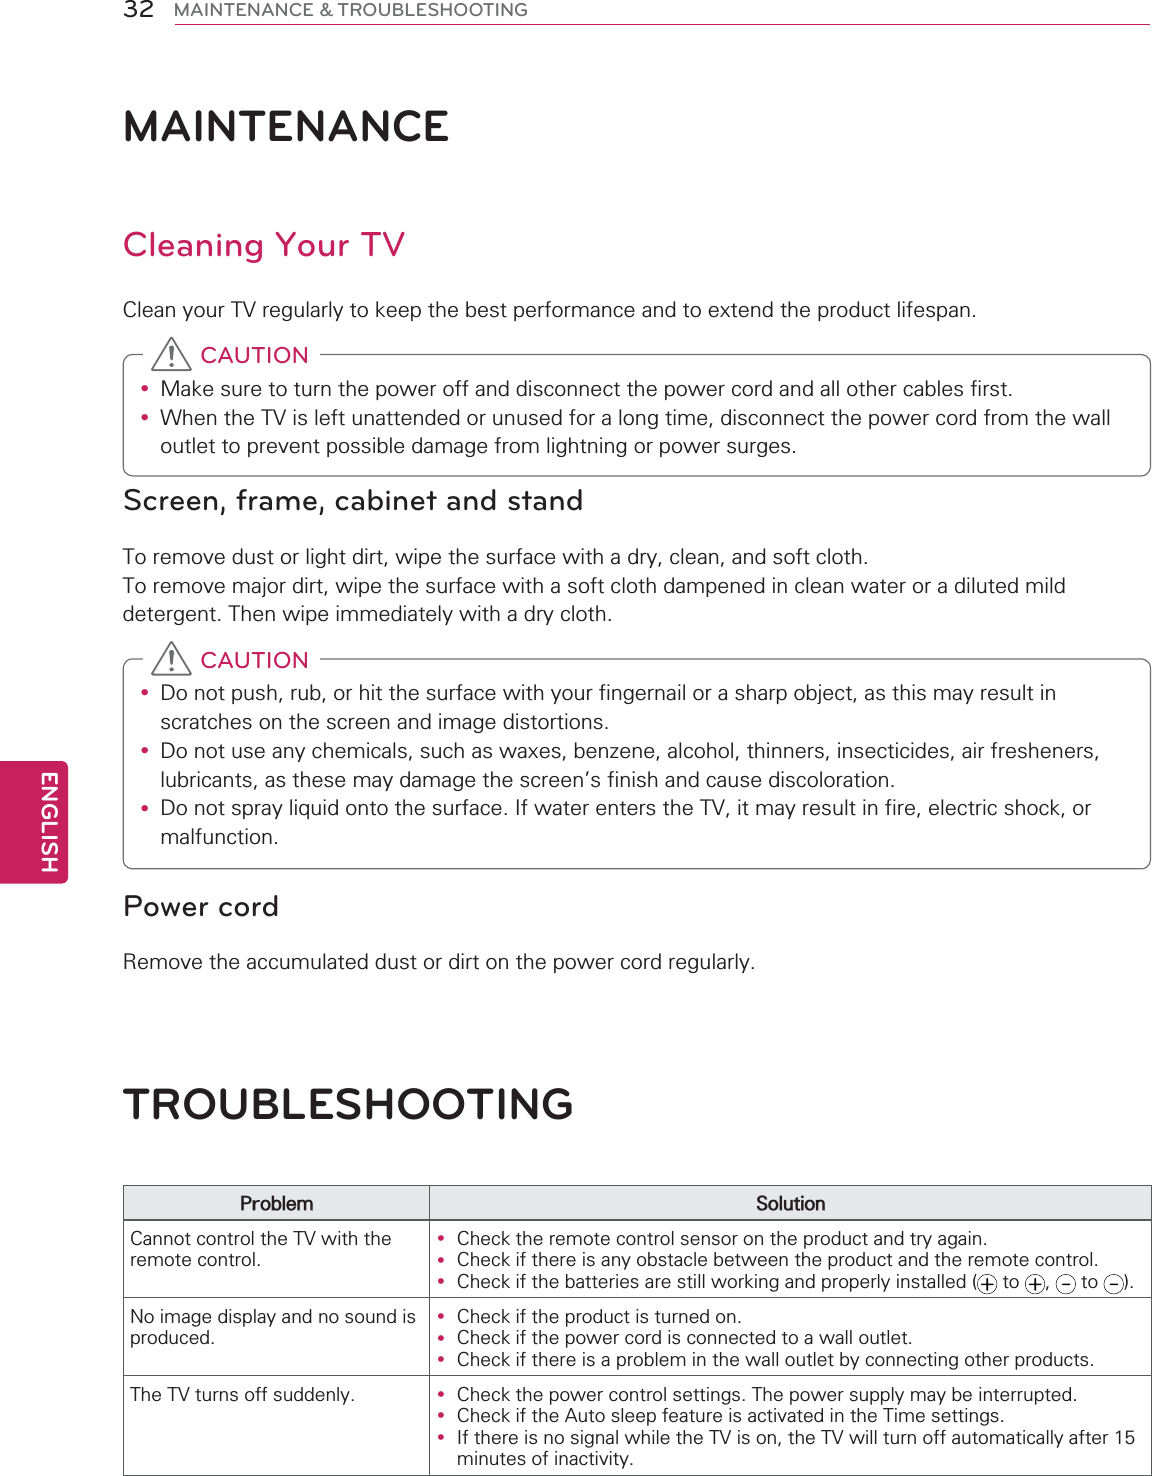 ENGLISH32 MAINTENANCE &amp; TROUBLESHOOTINGMAINTENANCECleaning Your TVClean your TV regularly to keep the best performance and to extend the product lifespan.y Make sure to turn the power off and disconnect the power cord and all other cables first.y When the TV is left unattended or unused for a long time, disconnect the power cord from the wall outlet to prevent possible damage from lightning or power surges. CAUTIONScreen, frame, cabinet and standTo remove dust or light dirt, wipe the surface with a dry, clean, and soft cloth. To remove major dirt, wipe the surface with a soft cloth dampened in clean water or a diluted mild detergent. Then wipe immediately with a dry cloth.y Do not push, rub, or hit the surface with your fingernail or a sharp object, as this may result in scratches on the screen and image distortions.y Do not use any chemicals, such as waxes, benzene, alcohol, thinners, insecticides, air fresheners, lubricants, as these may damage the screen’s finish and cause discoloration.y Do not spray liquid onto the surface. If water enters the TV, it may result in fire, electric shock, or malfunction. CAUTIONPower cordRemove the accumulated dust or dirt on the power cord regularly.TROUBLESHOOTINGProblem SolutionCannot control the TV with the remote control.y Check the remote control sensor on the product and try again.y Check if there is any obstacle between the product and the remote control.y Check if the batteries are still working and properly installed (  to  ,   to  ).No image display and no sound is produced.y Check if the product is turned on.y Check if the power cord is connected to a wall outlet.y Check if there is a problem in the wall outlet by connecting other products.The TV turns off suddenly. y Check the power control settings. The power supply may be interrupted.y Check if the Auto sleep feature is activated in the Time settings. y If there is no signal while the TV is on, the TV will turn off automatically after 15 minutes of inactivity.